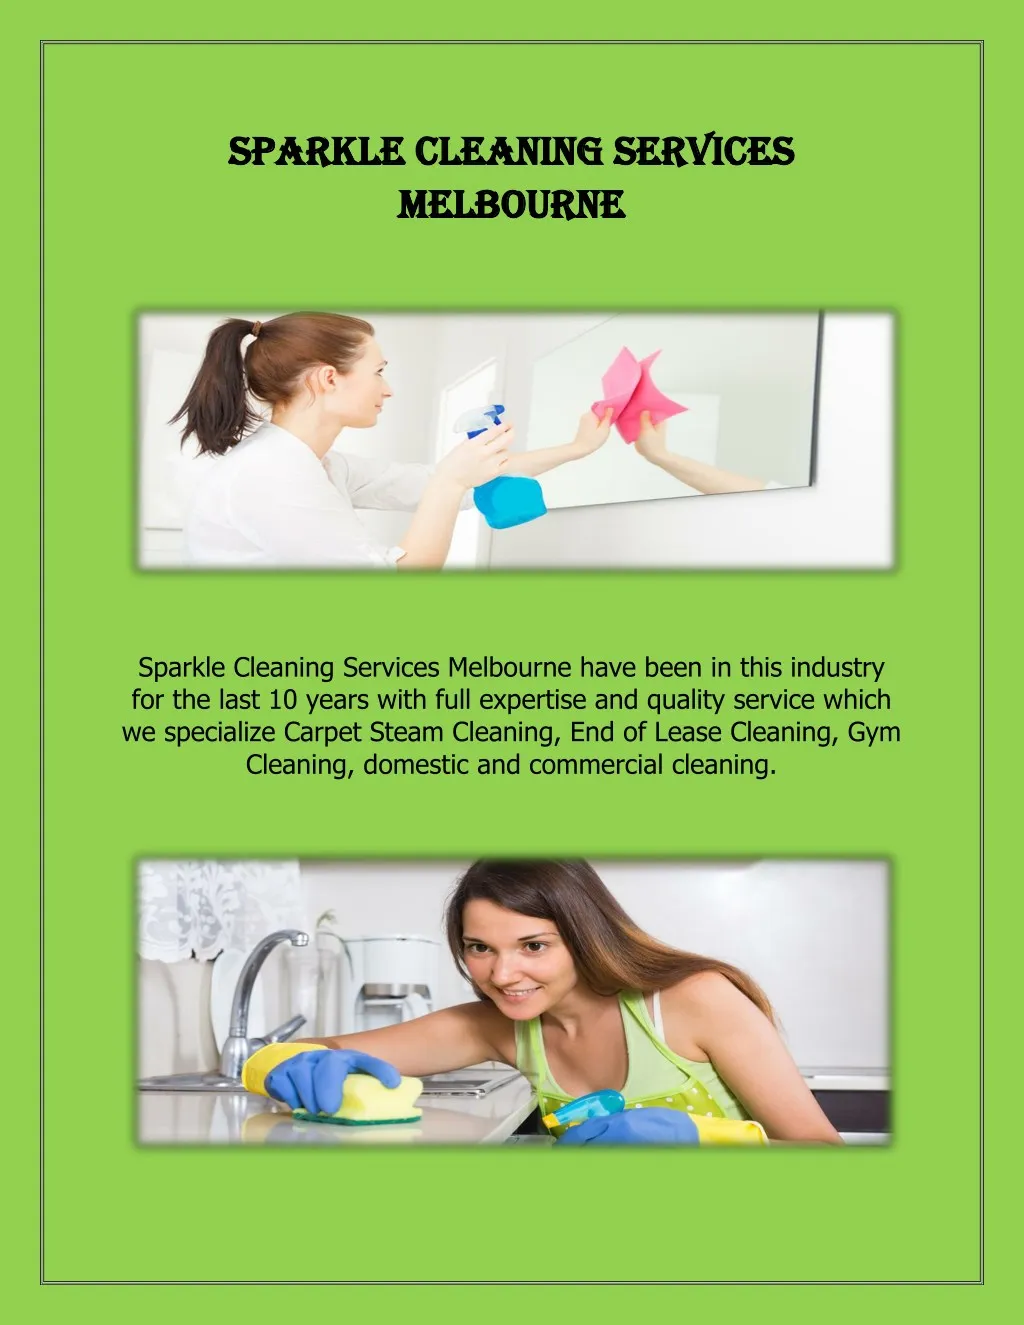 sparkle cleaning services sparkle cleaning